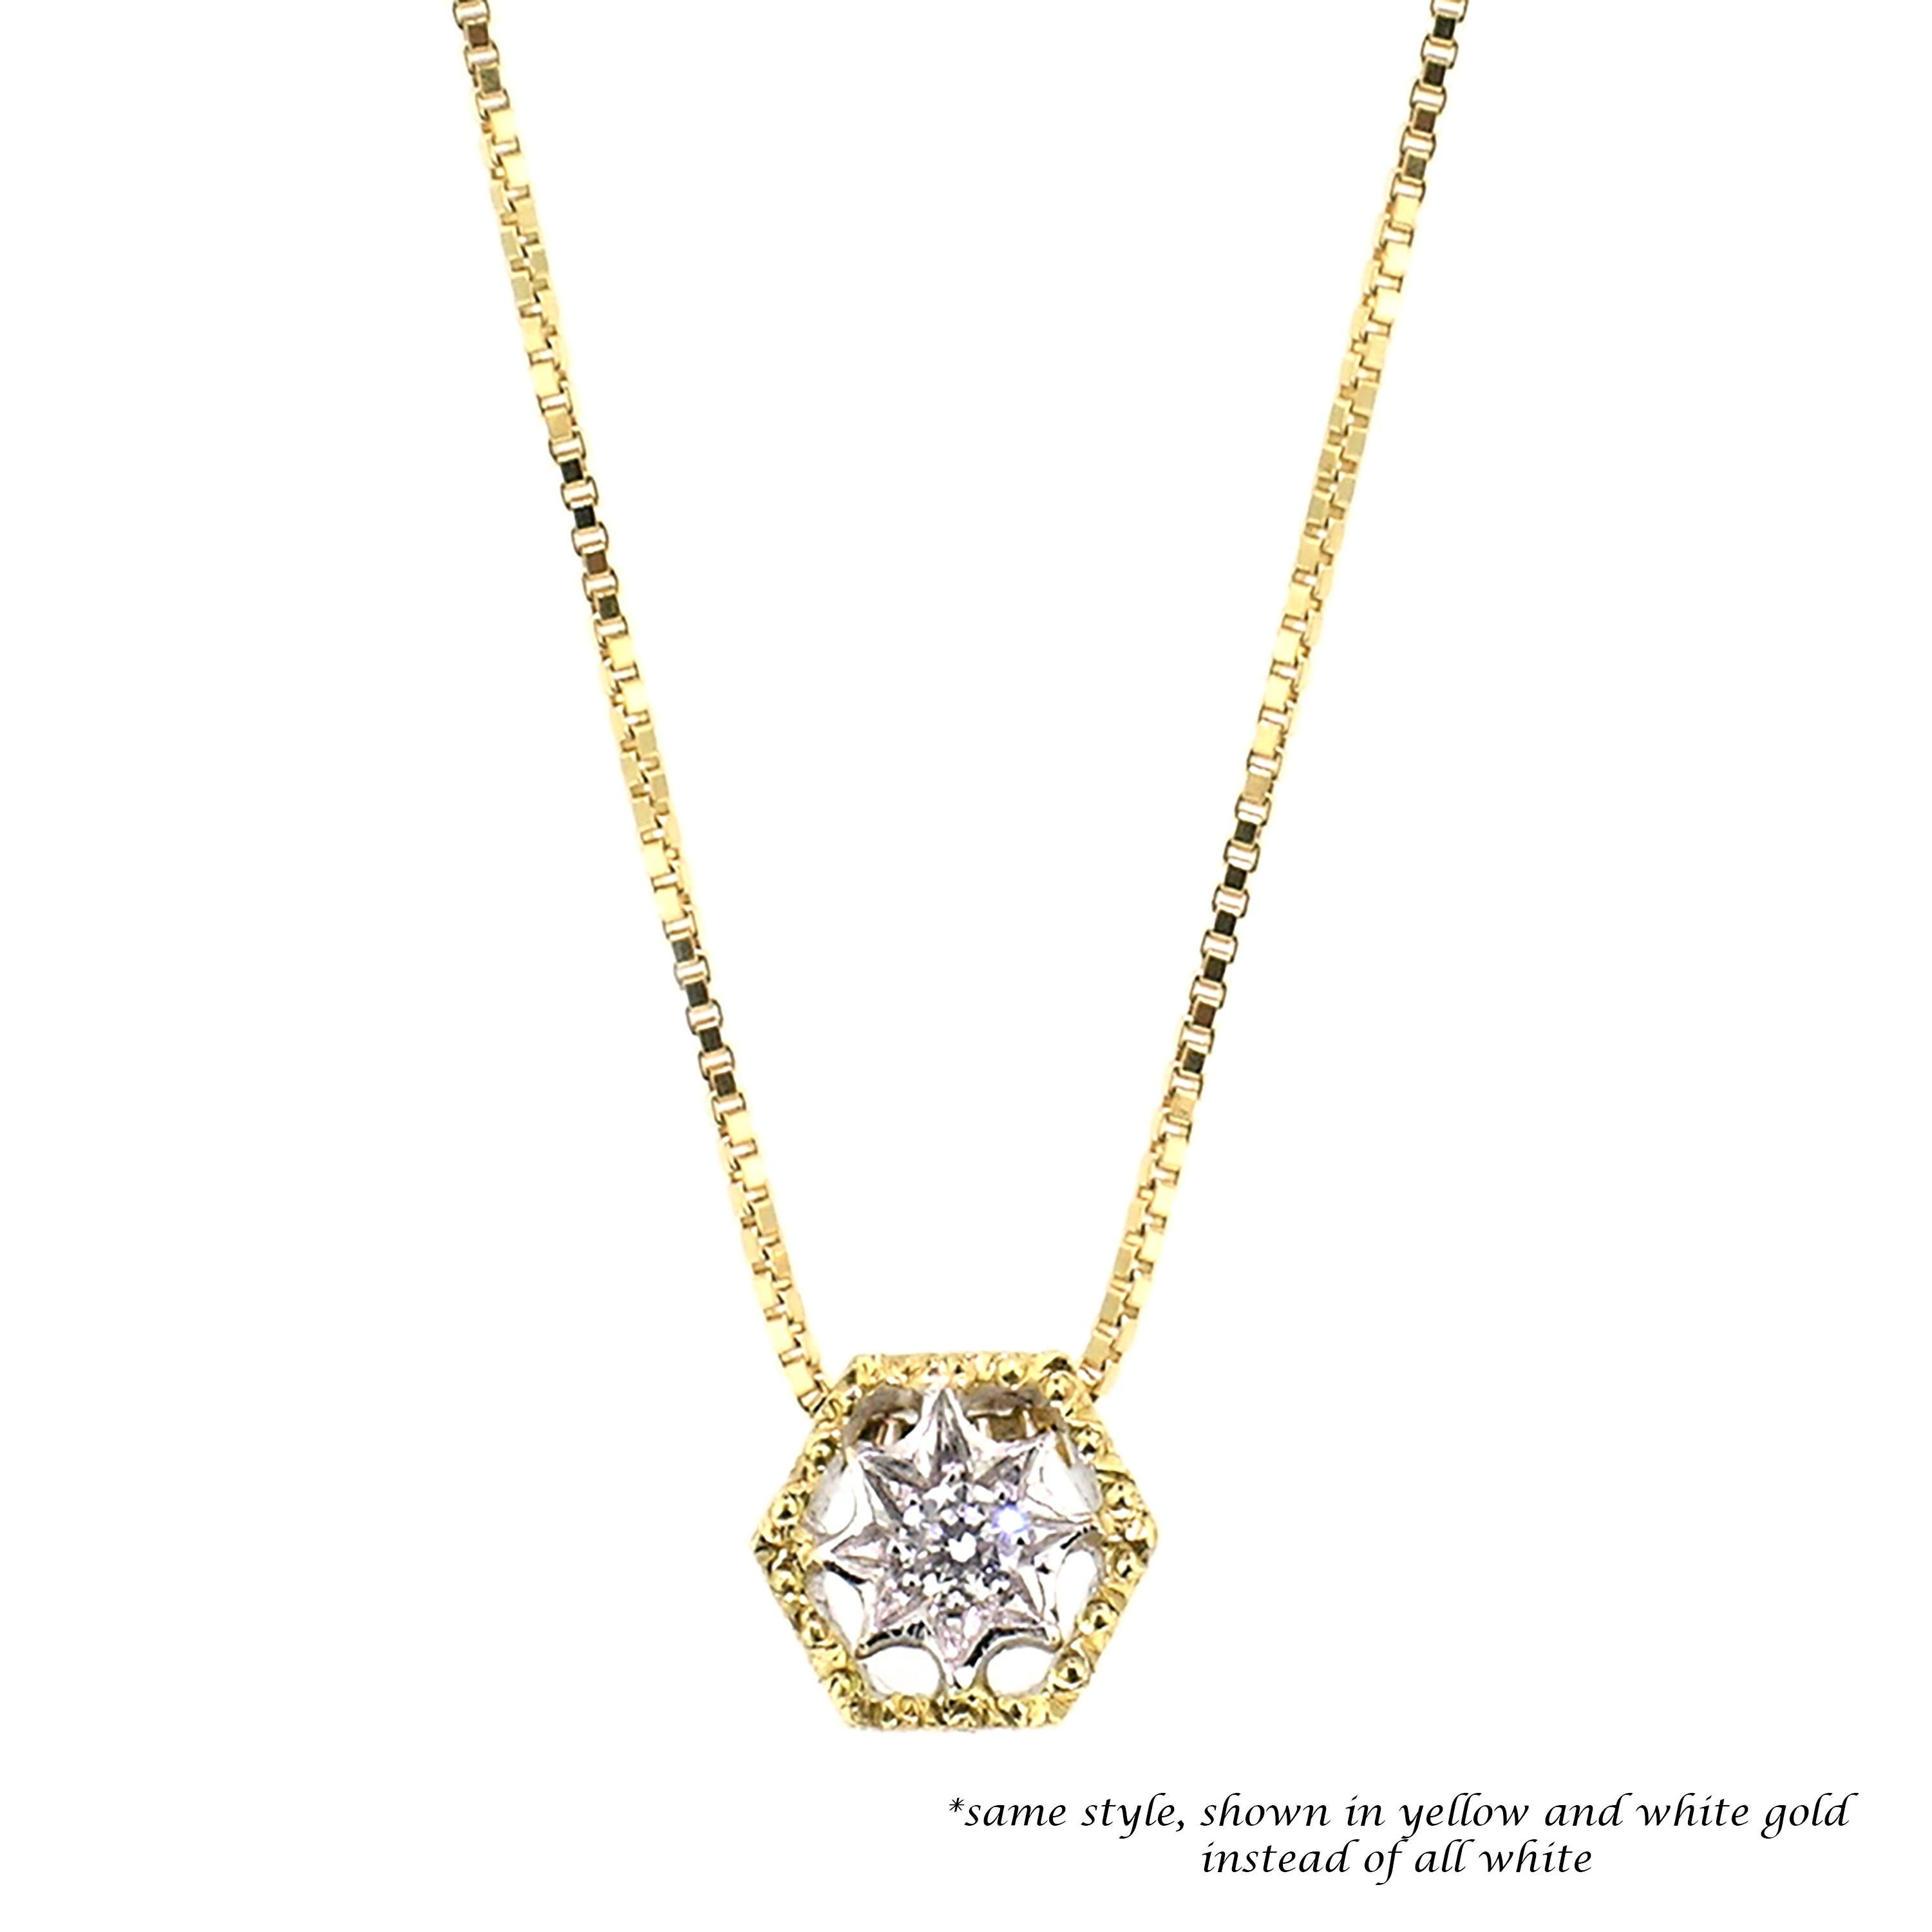 Round Cut 18kt and Diamond Pendant Necklace, Handmade and Hand Engraved in Italy